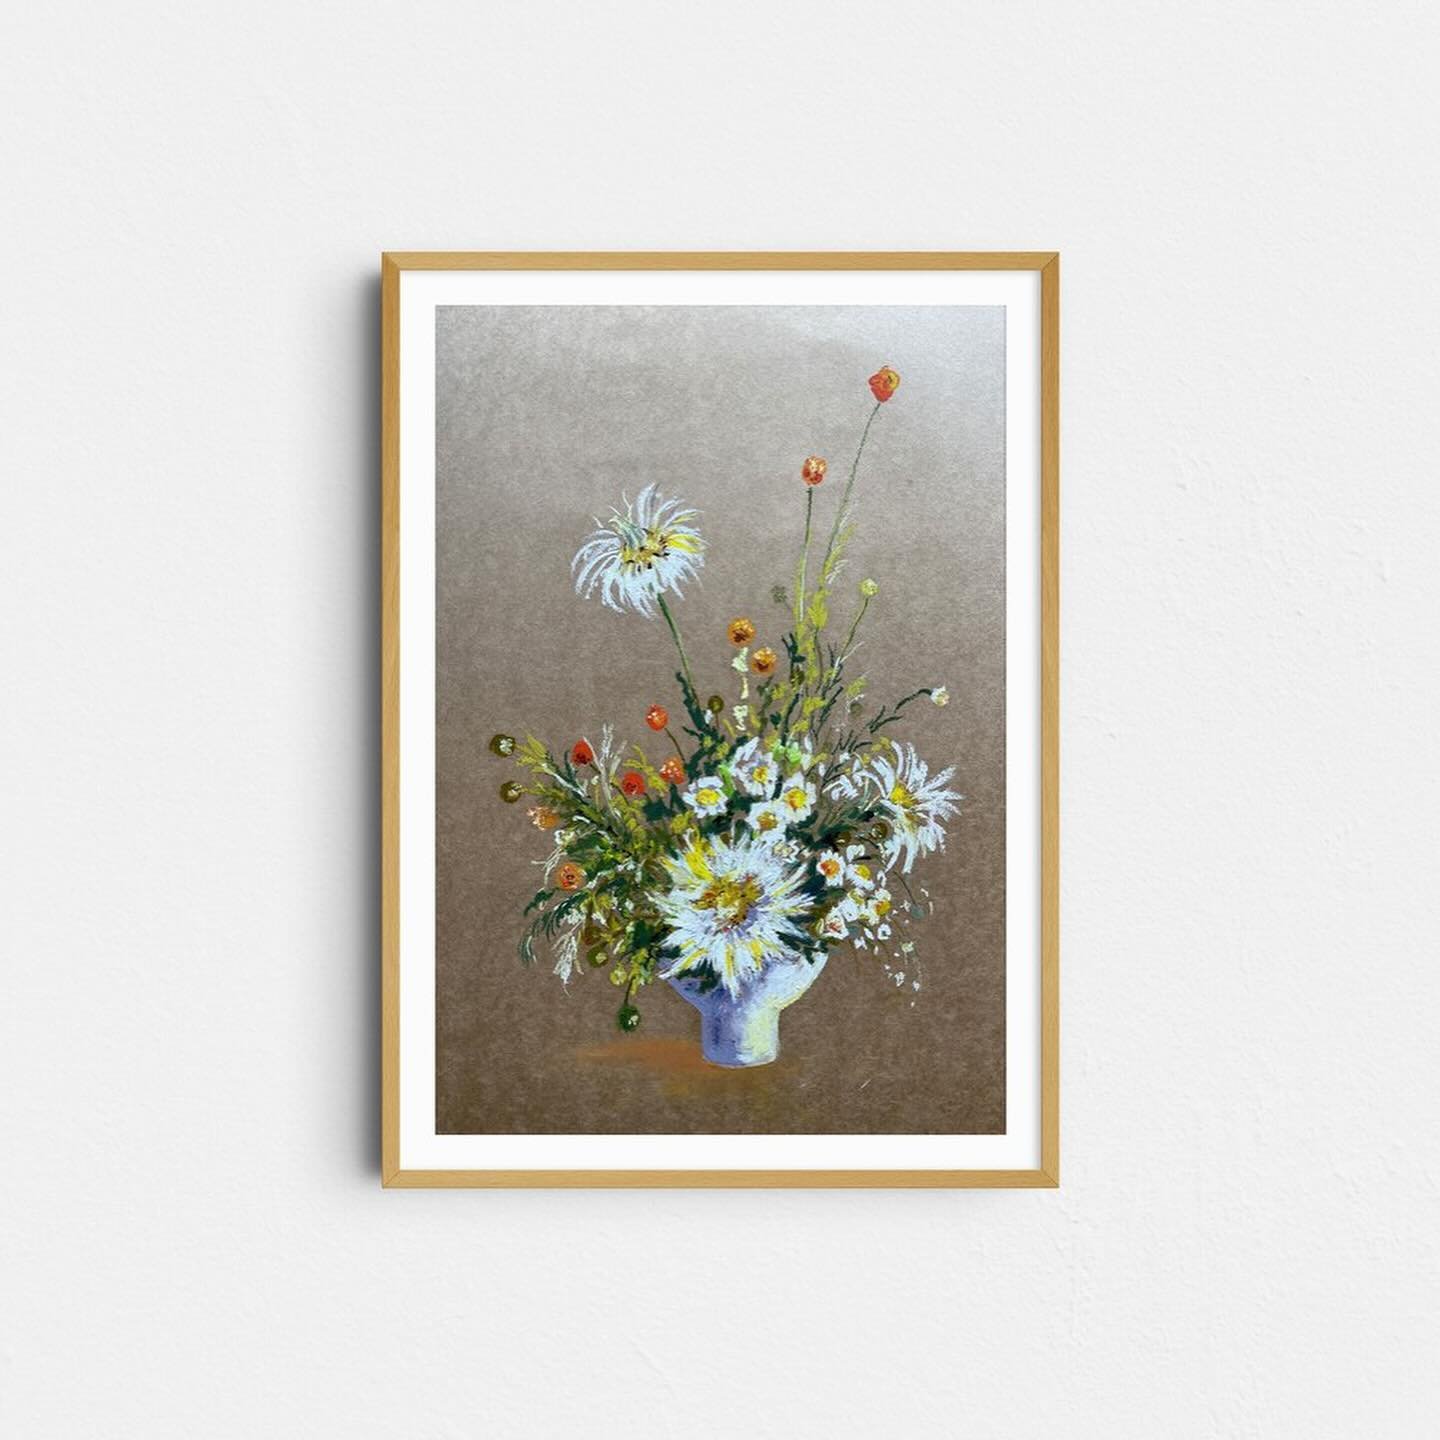 Acacia Spondylophylla, Paper Daisy and Flannel Flowers - Oil Pastel Original Art framed in Tasmanian Oak - $690. Available though my shop